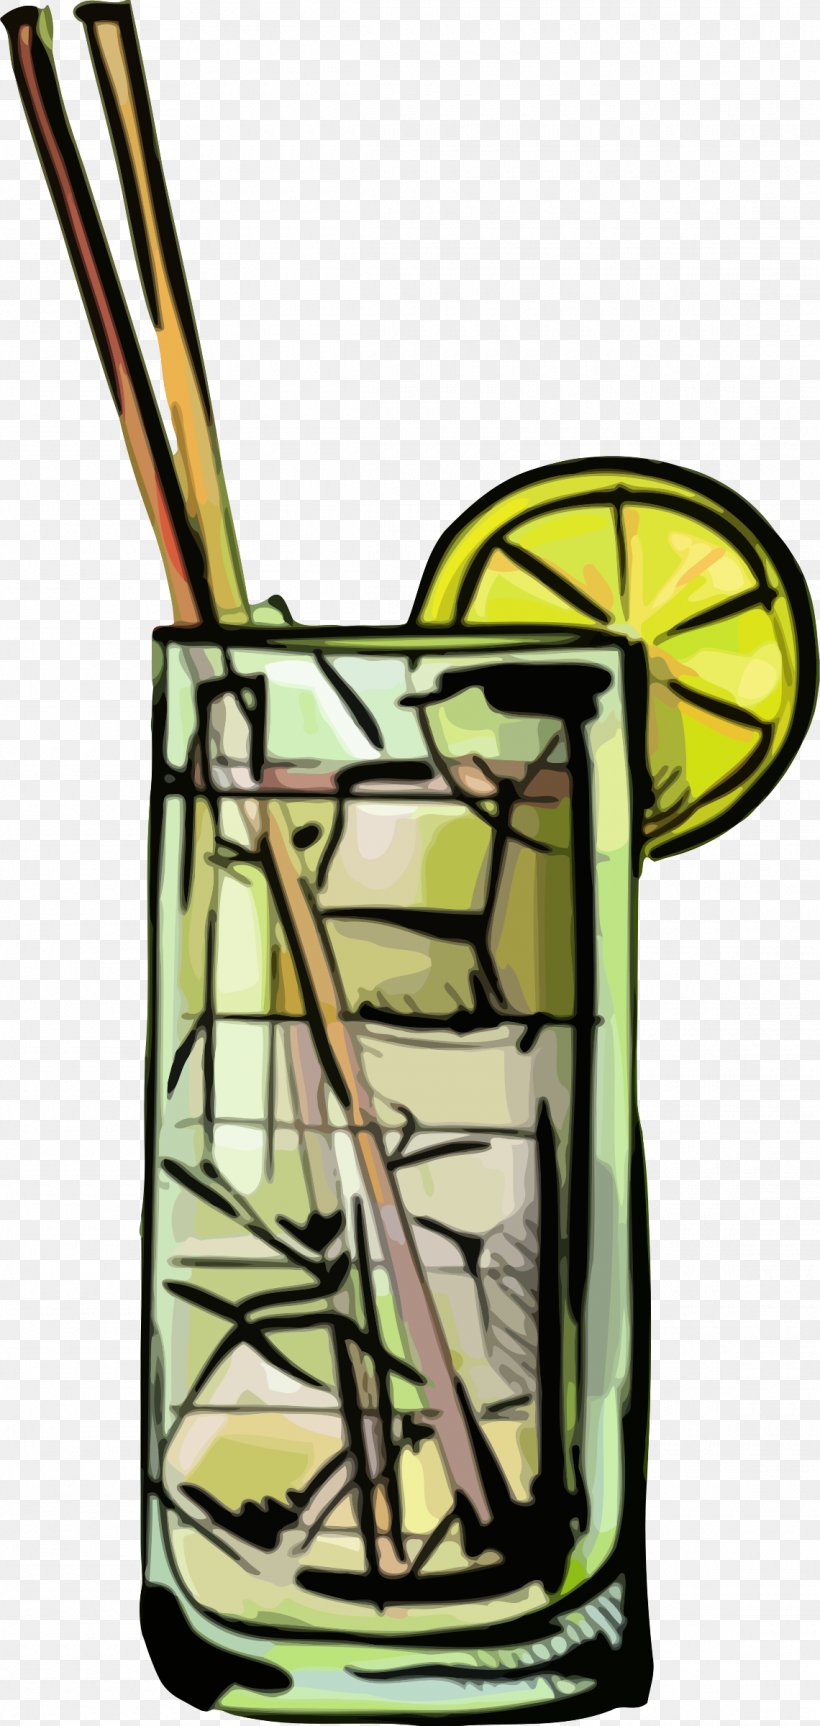 Long Island Iced Tea Cocktail Alcoholic Drink, PNG, 1140x2400px, Long Island Iced Tea, Alcoholic Drink, Camellia Sinensis, Cocktail, Cocktail Glass Download Free